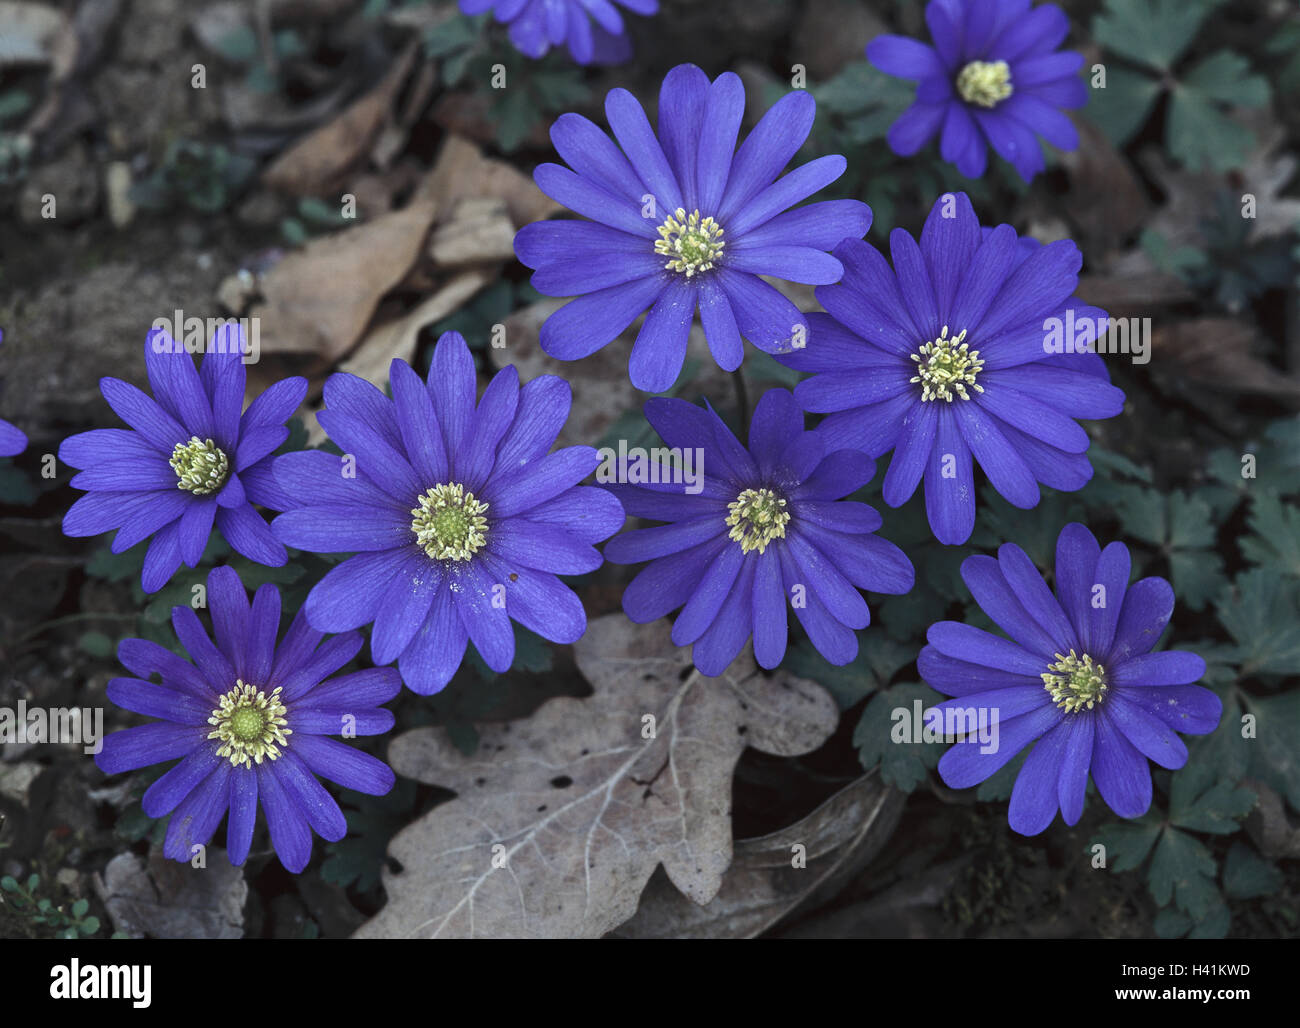 Greek anemone, anemone blanda, forest floor, forest flowers, nature, botany, flora, plants, flowers, blossoms, blue, blossom, crowfoot plant, ray anemone, anemone, Balkan anemone Balkan anemone, spring flower Stock Photo